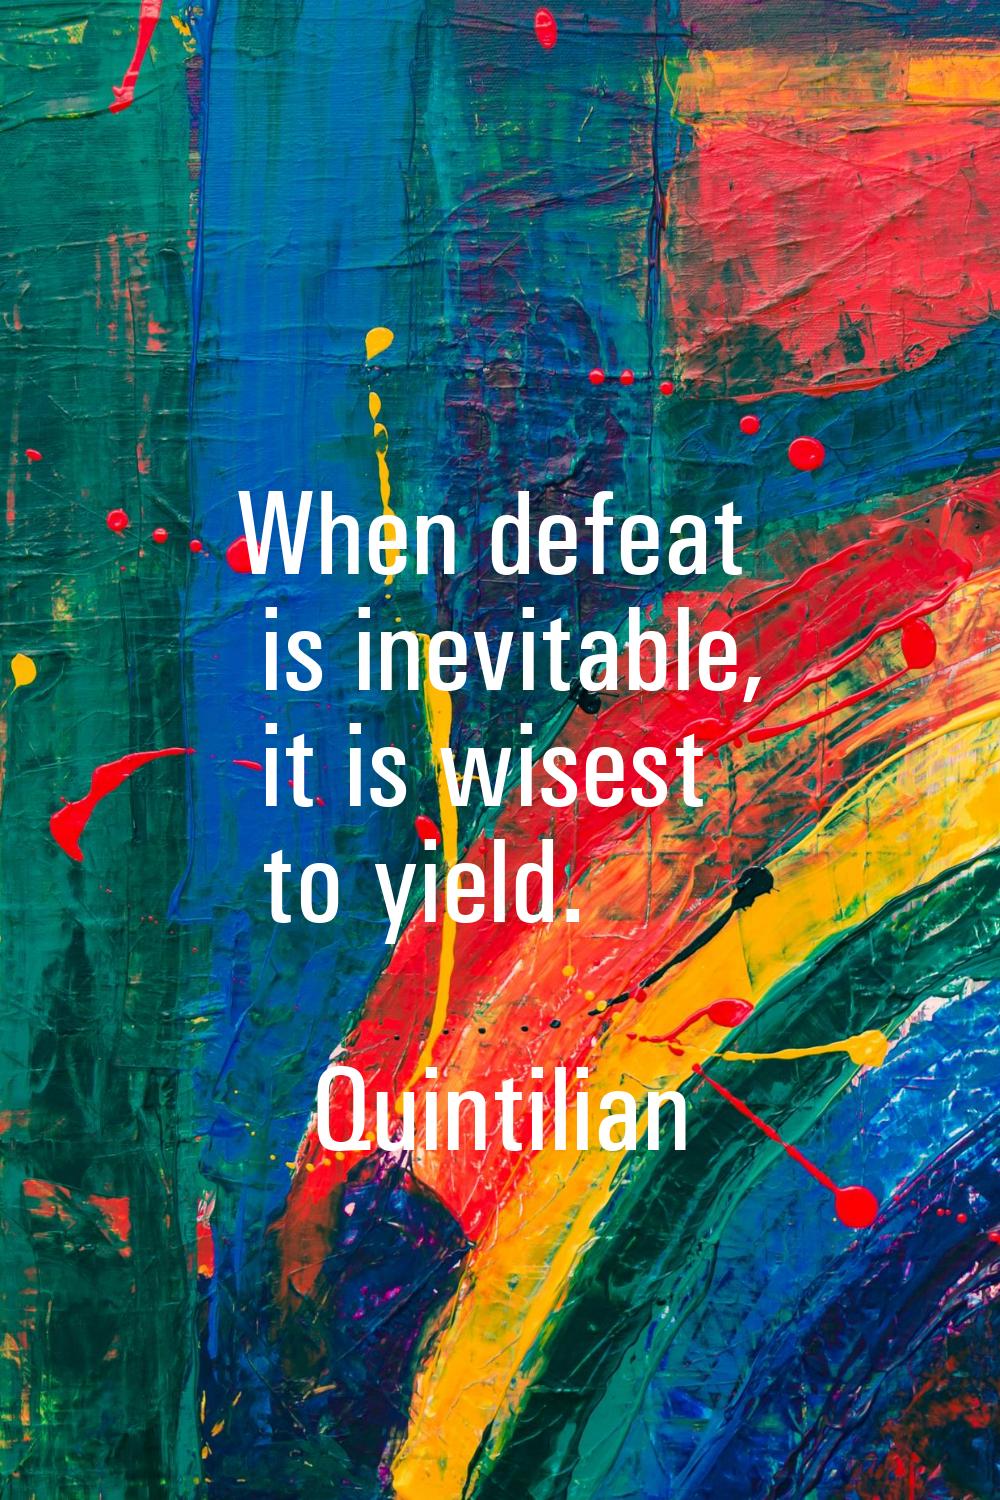 When defeat is inevitable, it is wisest to yield.